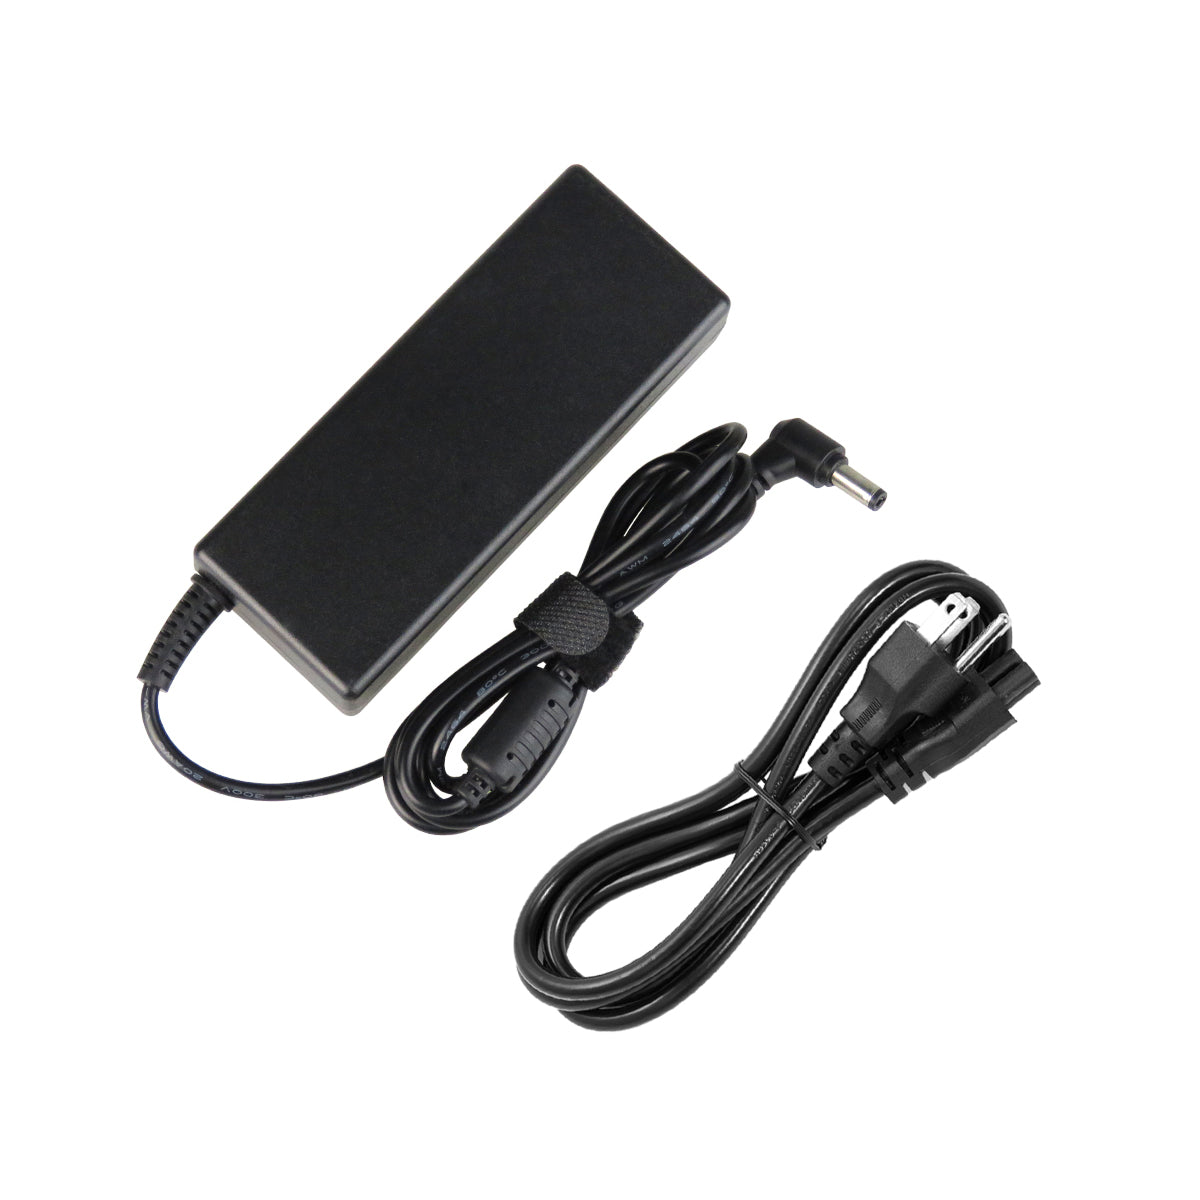 AC Adapter Charger for ASUS B53E Notebook.